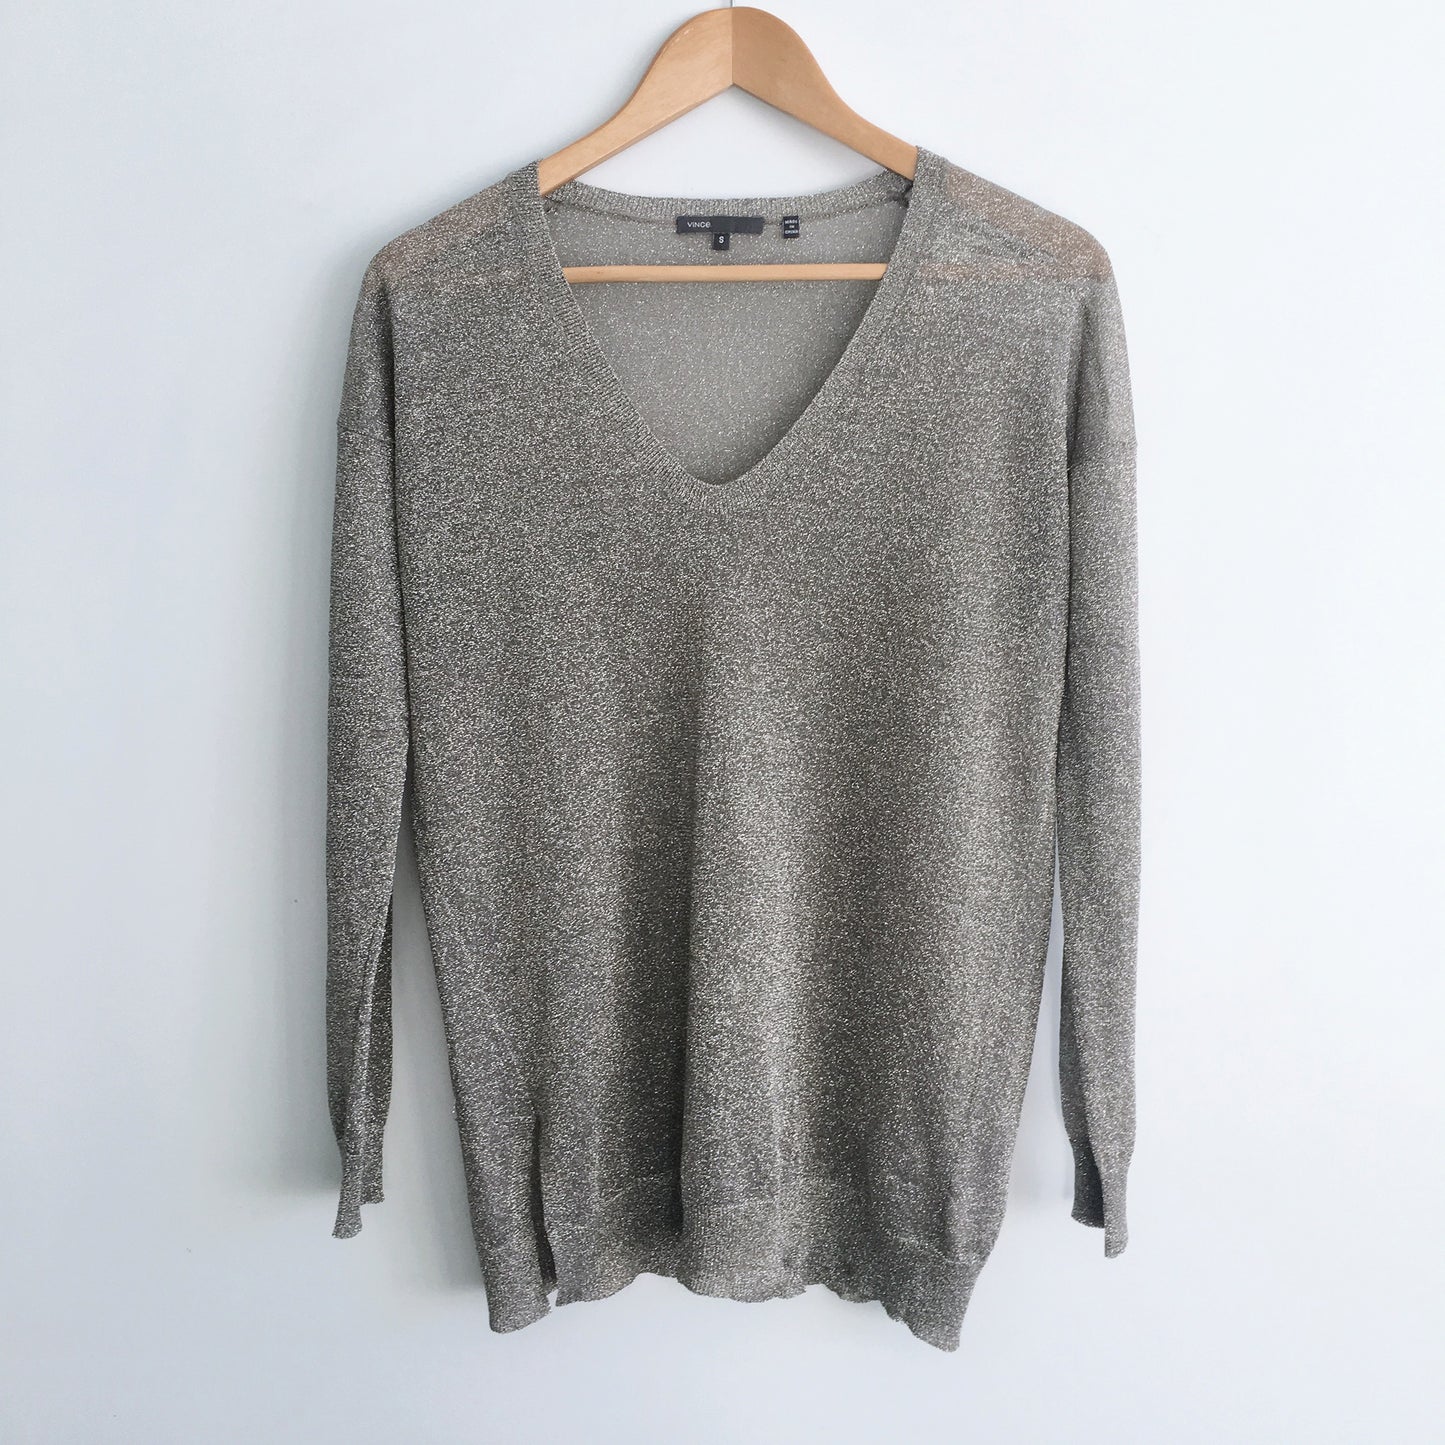 Vince Gold V Neck Sweater - size Small